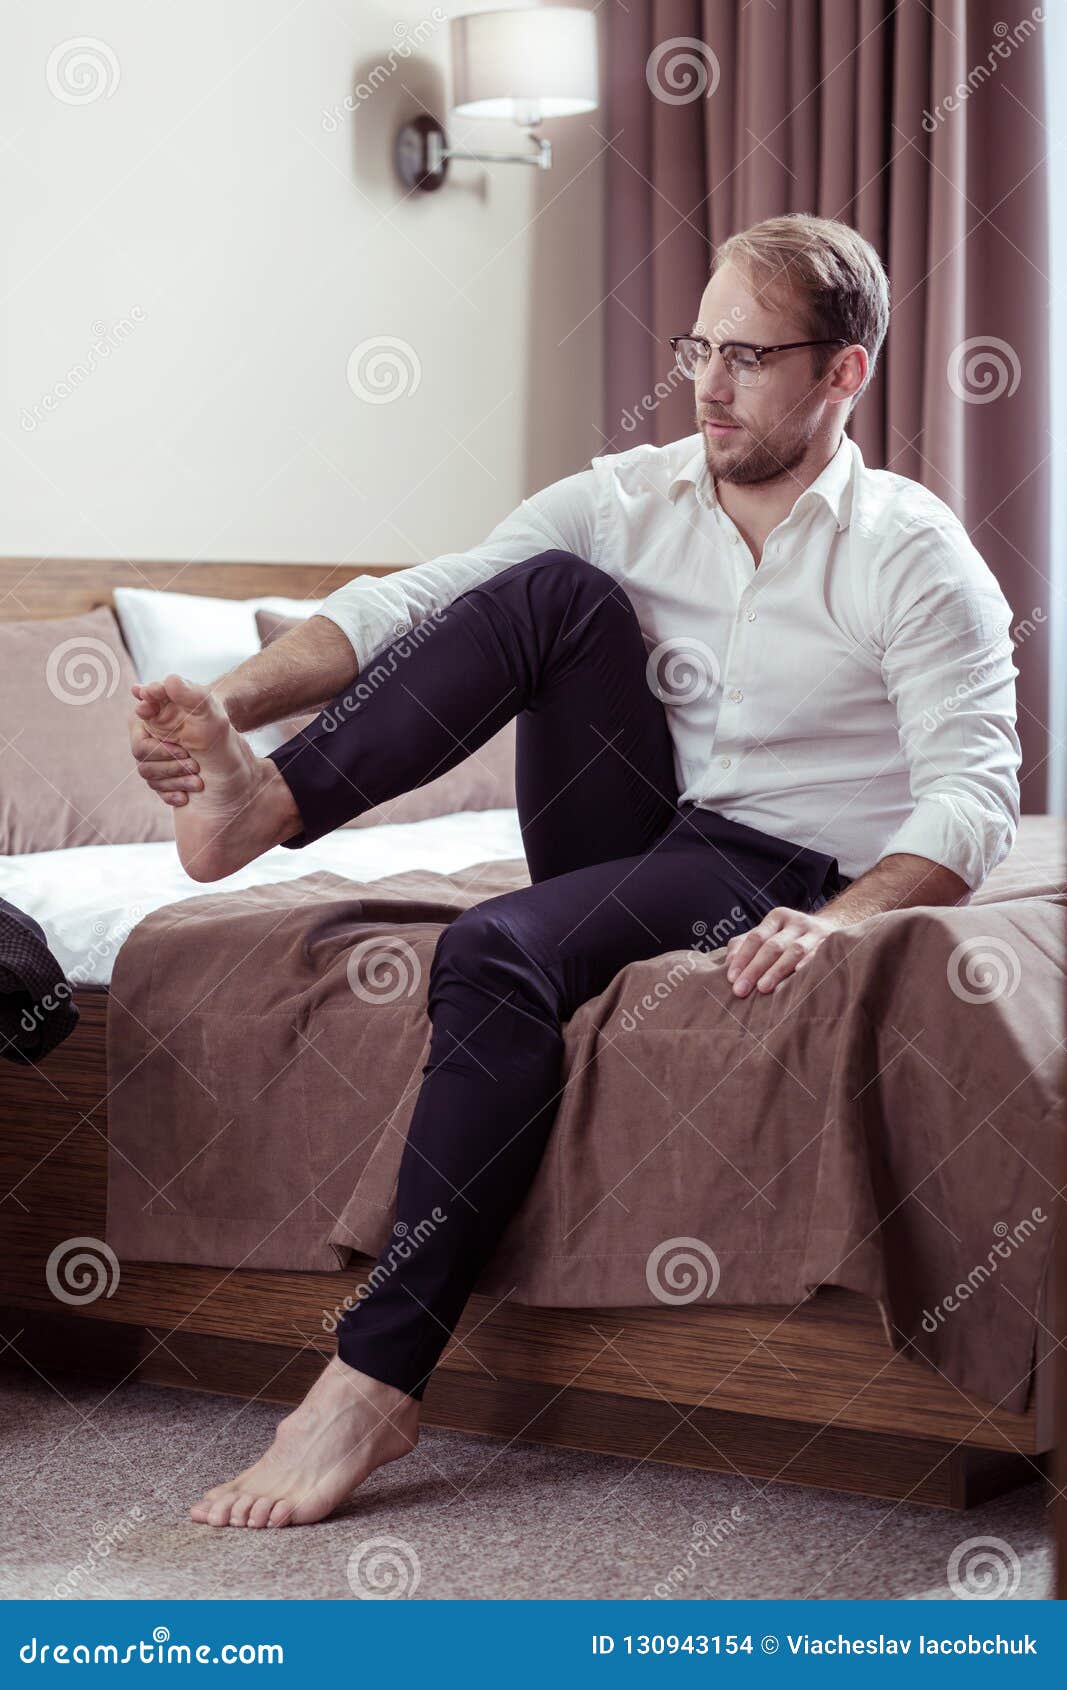 Businessman Wearing Glasses Taking His Shoes Off after Difficult Day ...